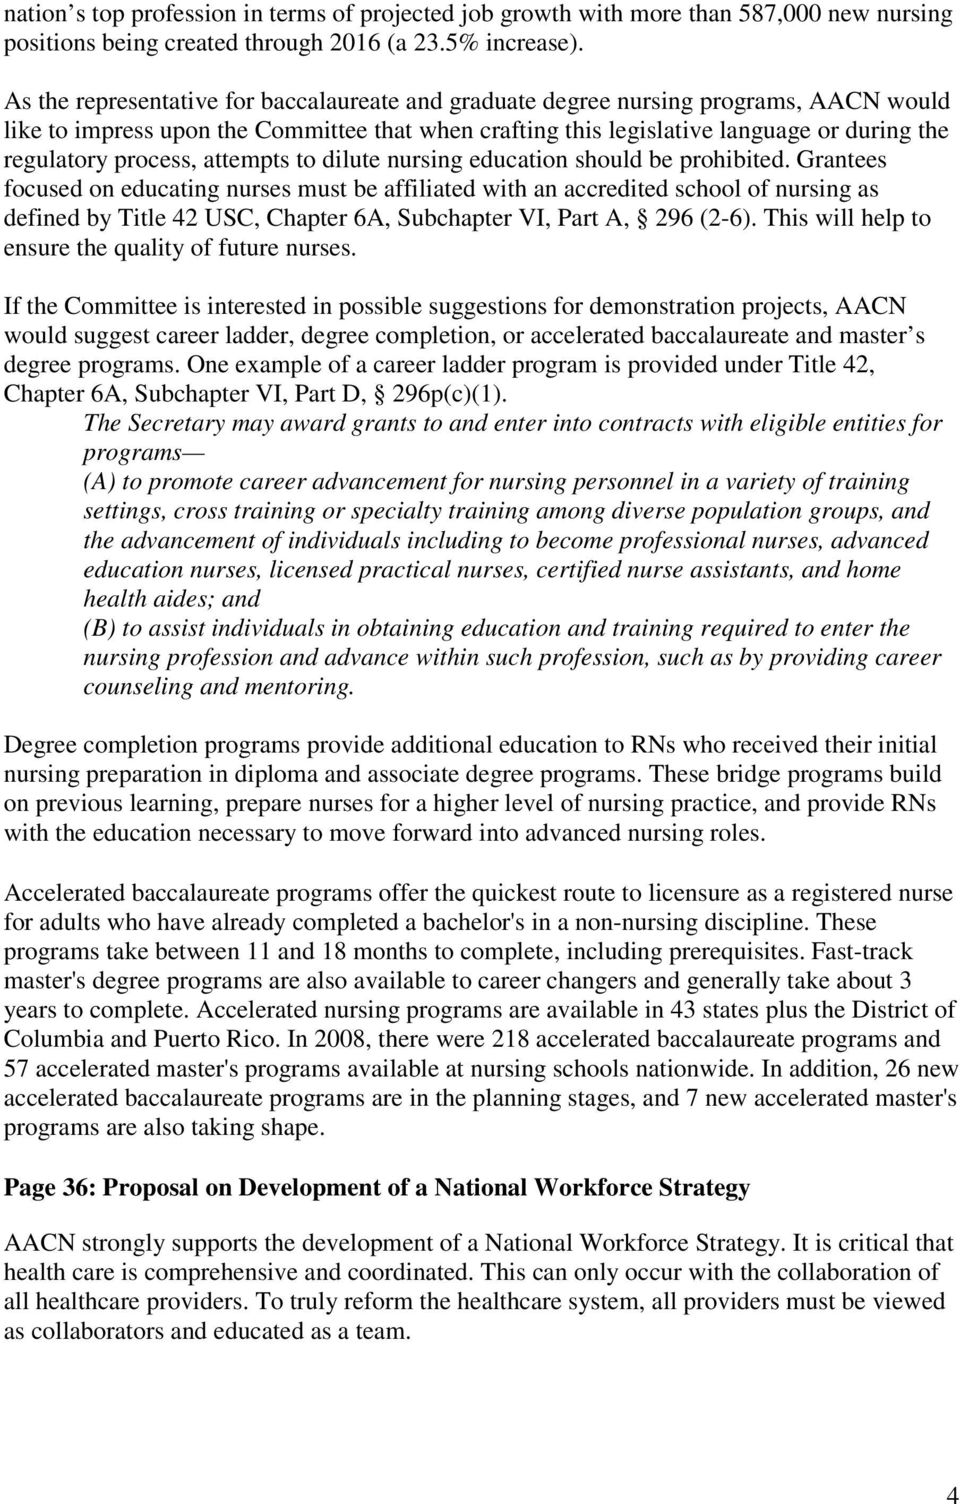 process, attempts to dilute nursing education should be prohibited.